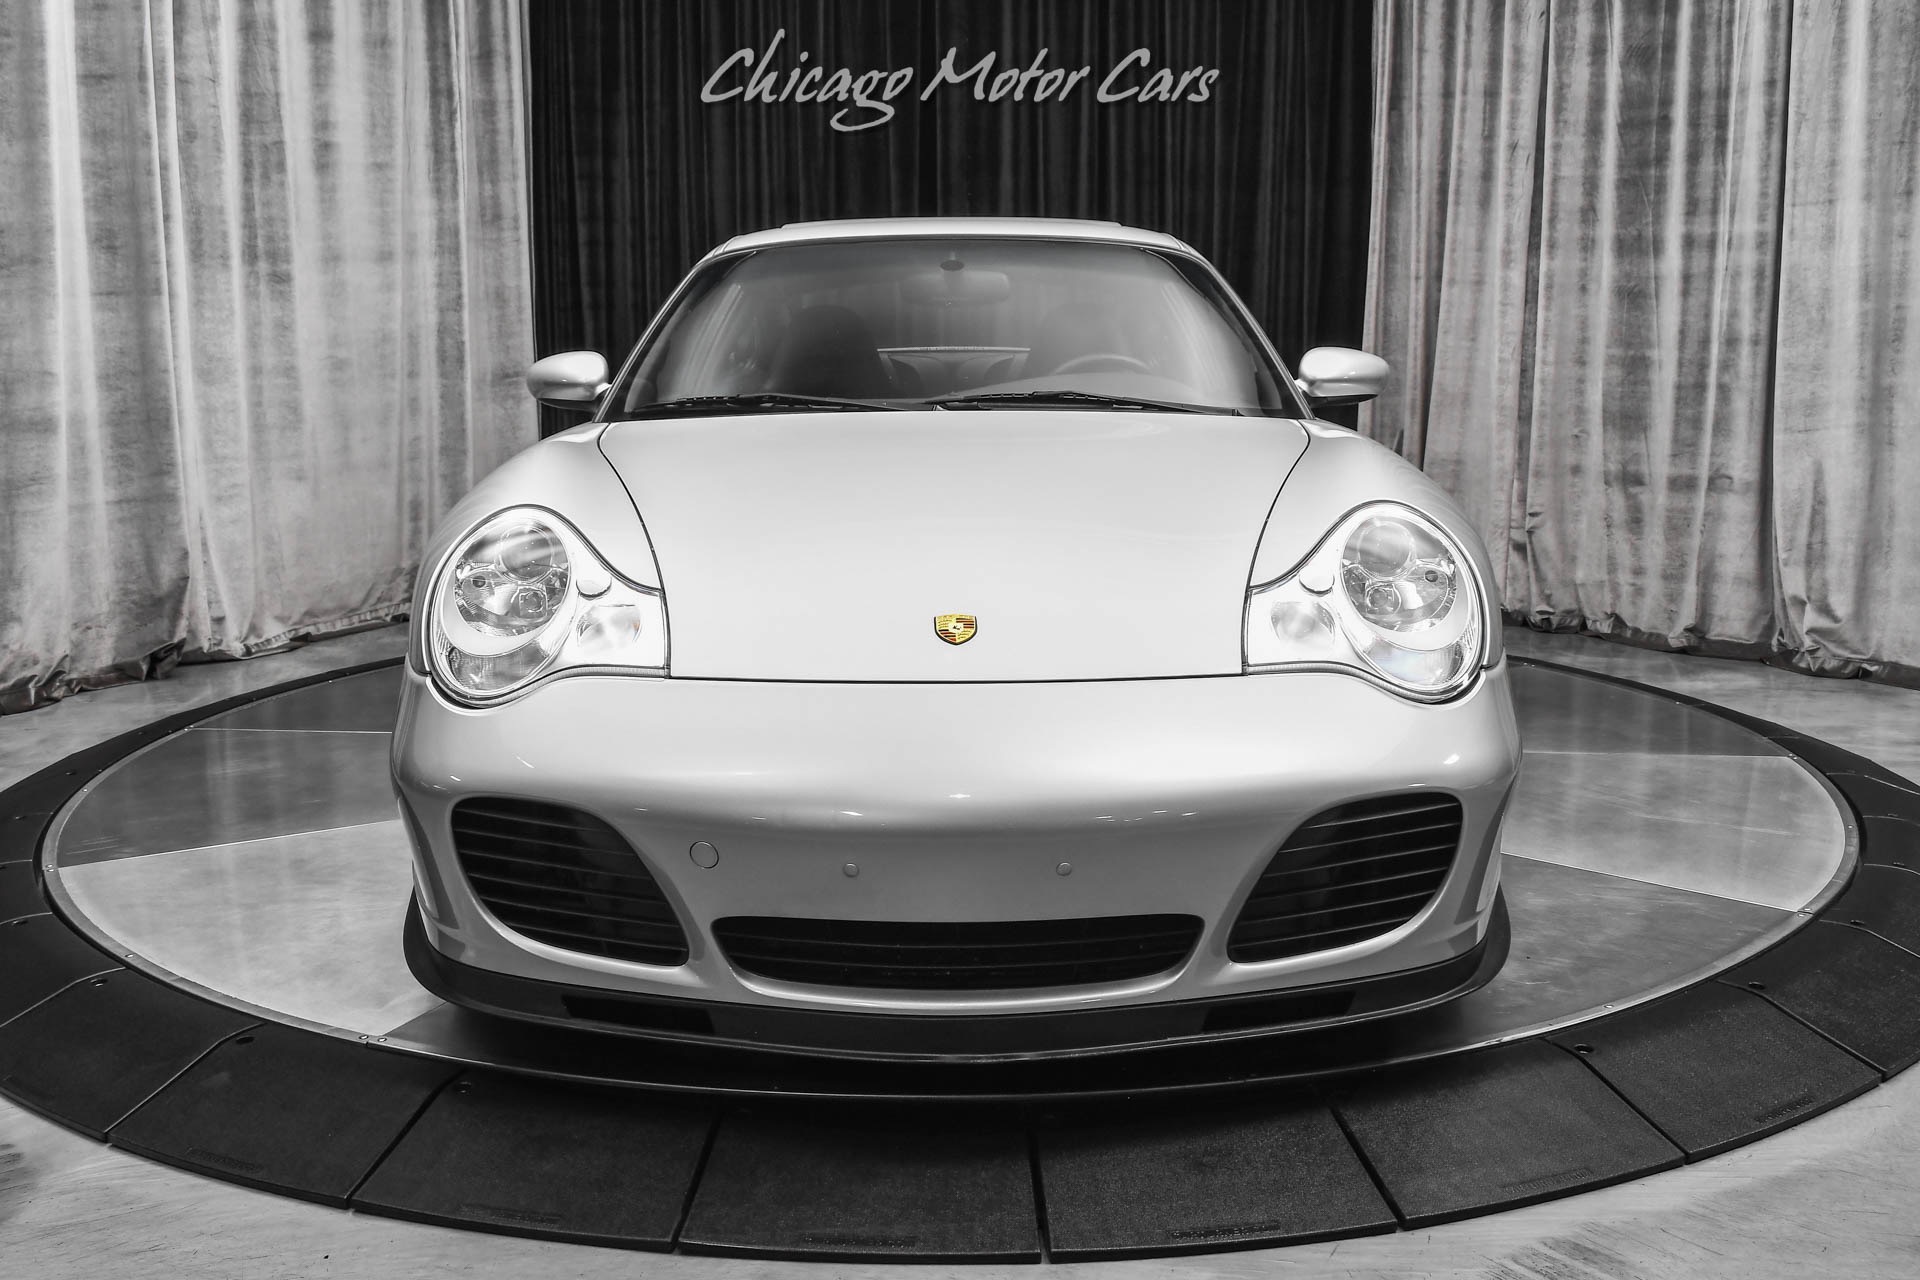 Used-2003-Porsche-911-996-Turbo-Coupe-6-Speed-Manual-SSR-Wheels-Full-Leather-Just-Serviced